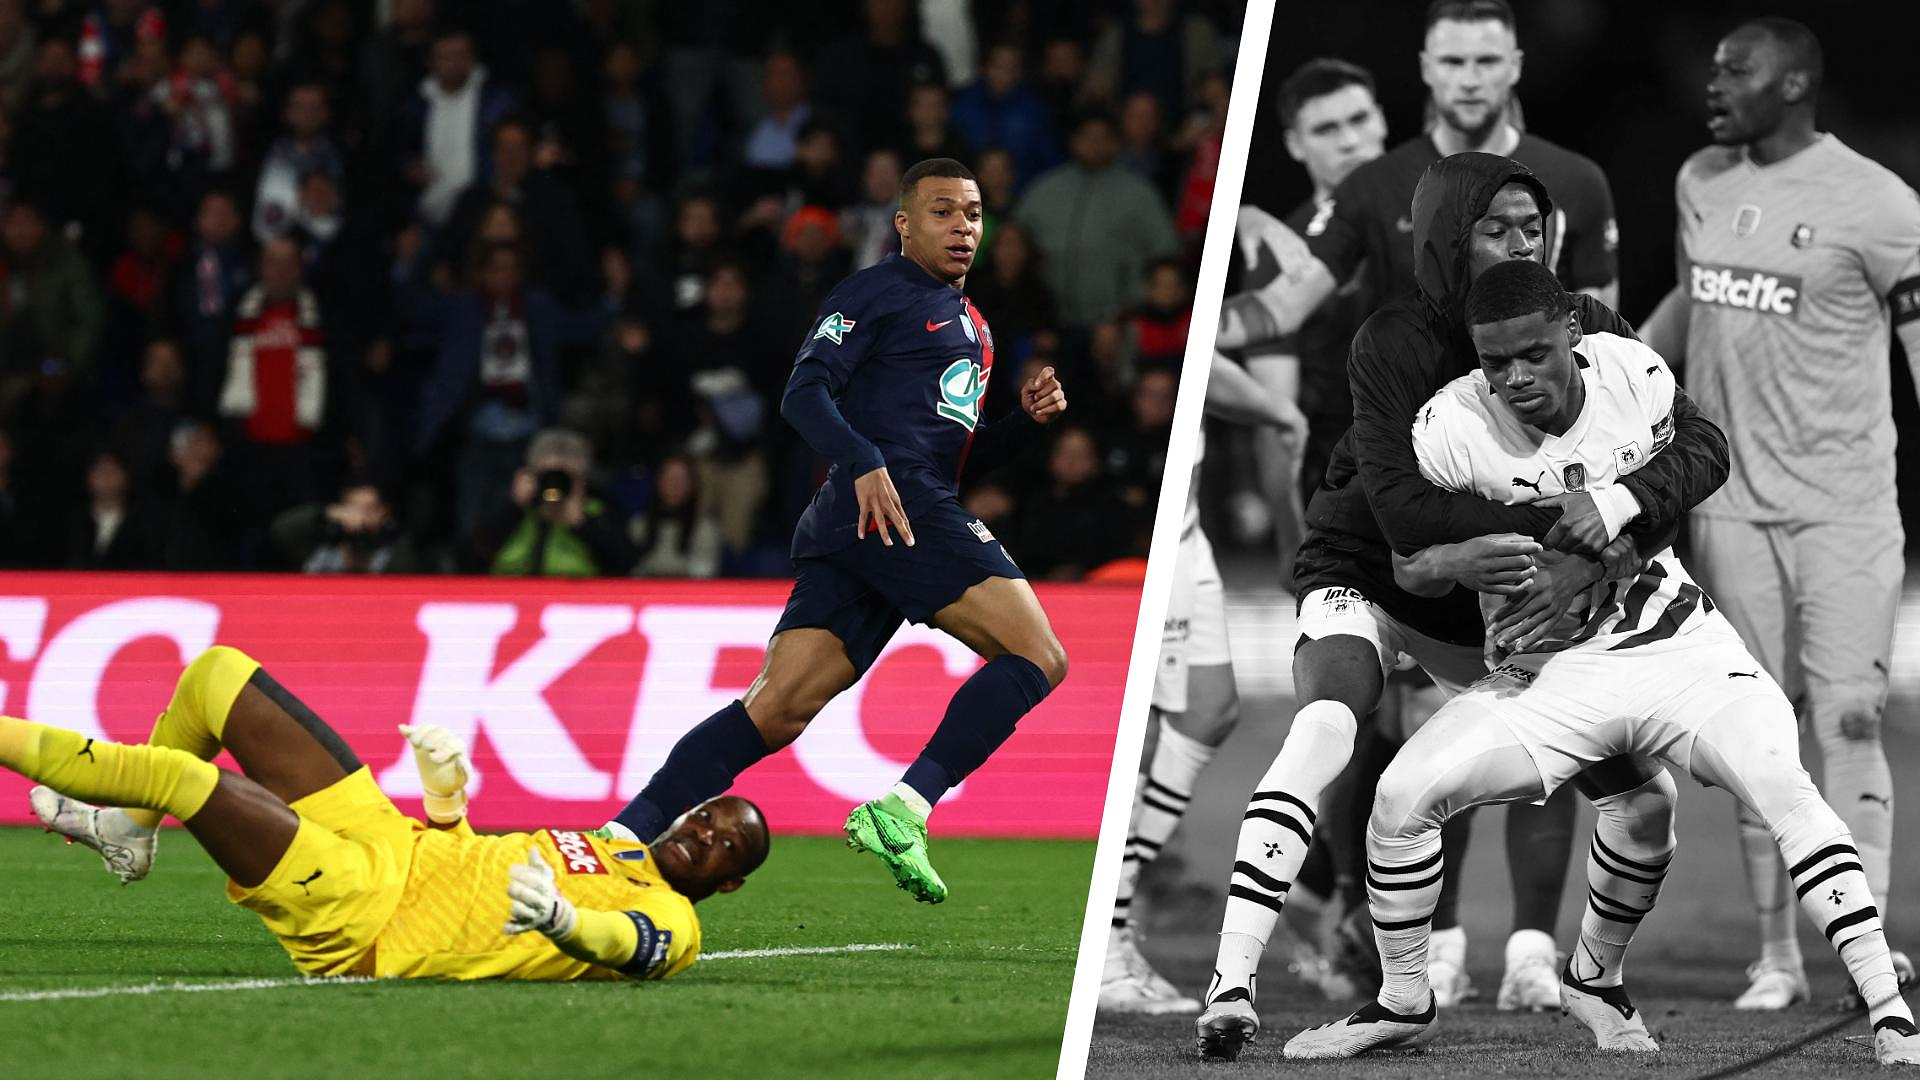 PSG-Rennes: the Mbappé/Mandanda duel, delicious Marquinhos, Omari totally beside himself… Favorites and scratches